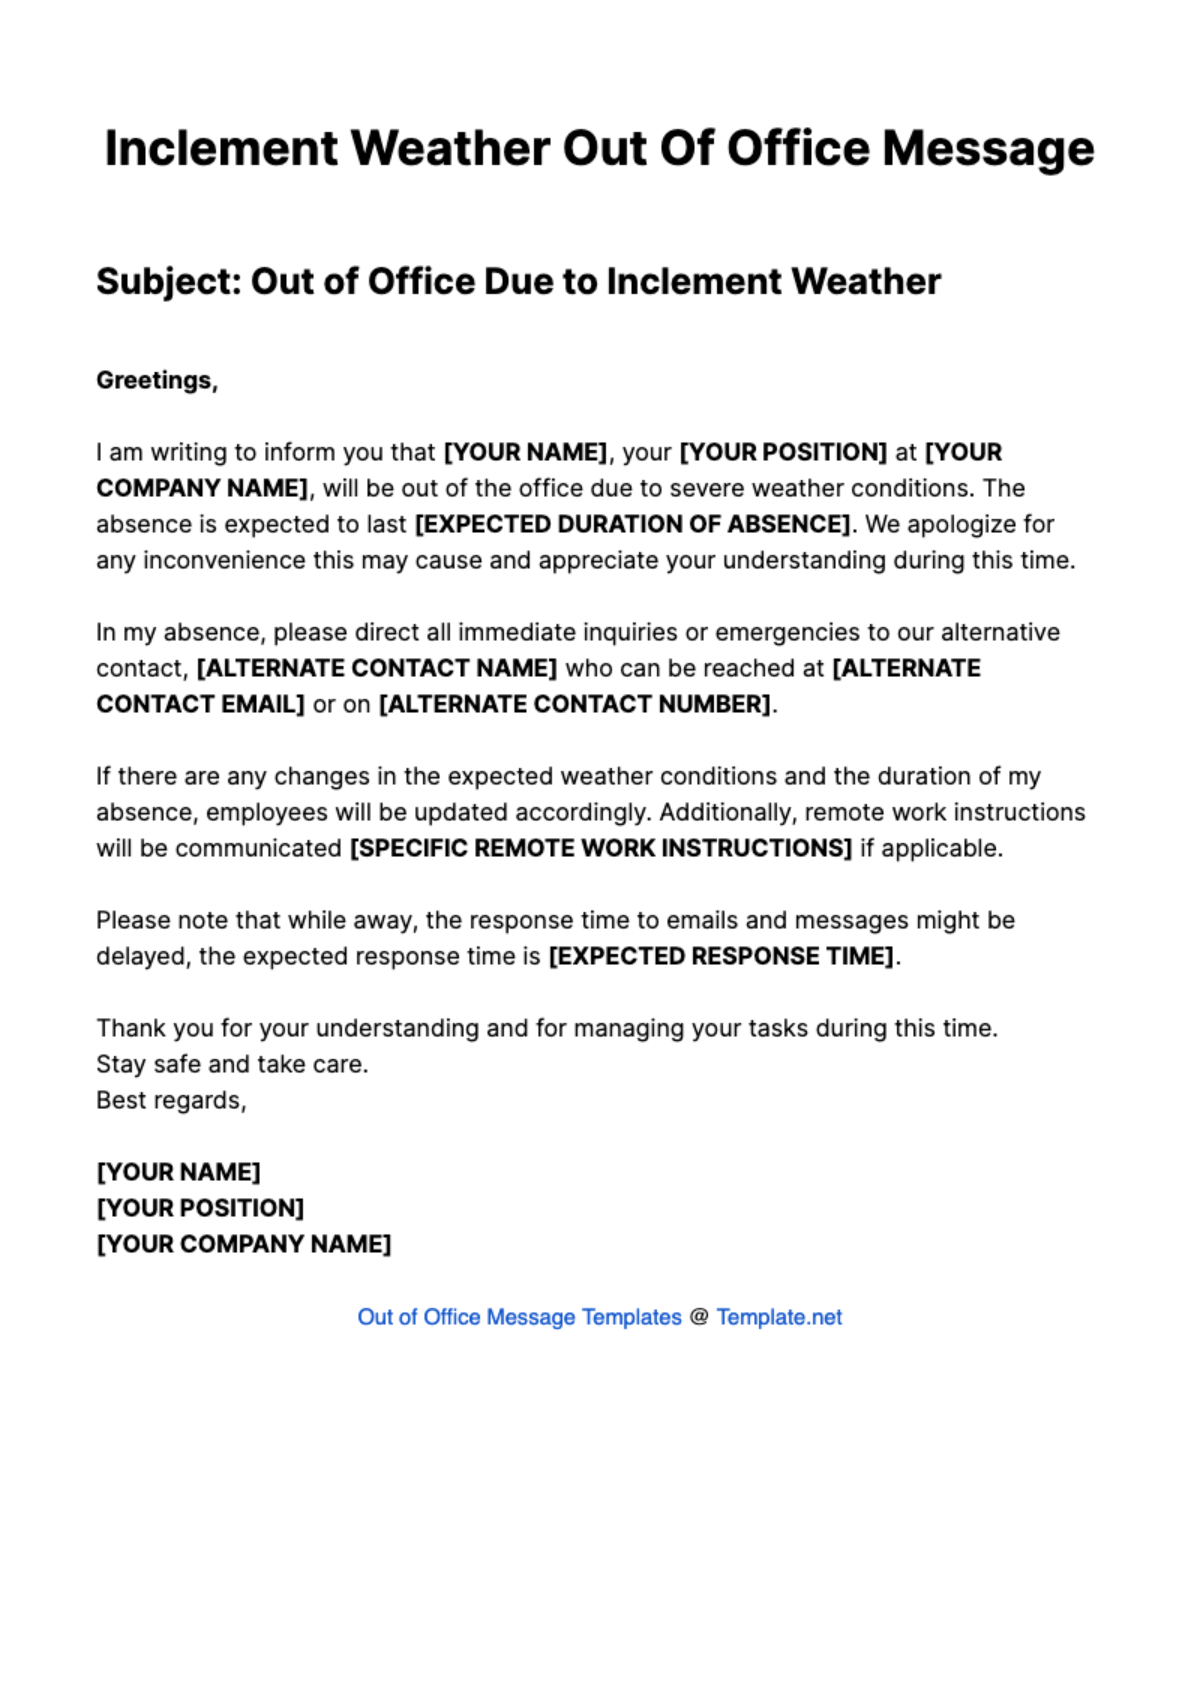 Inclement Weather Out Of Office Message Template